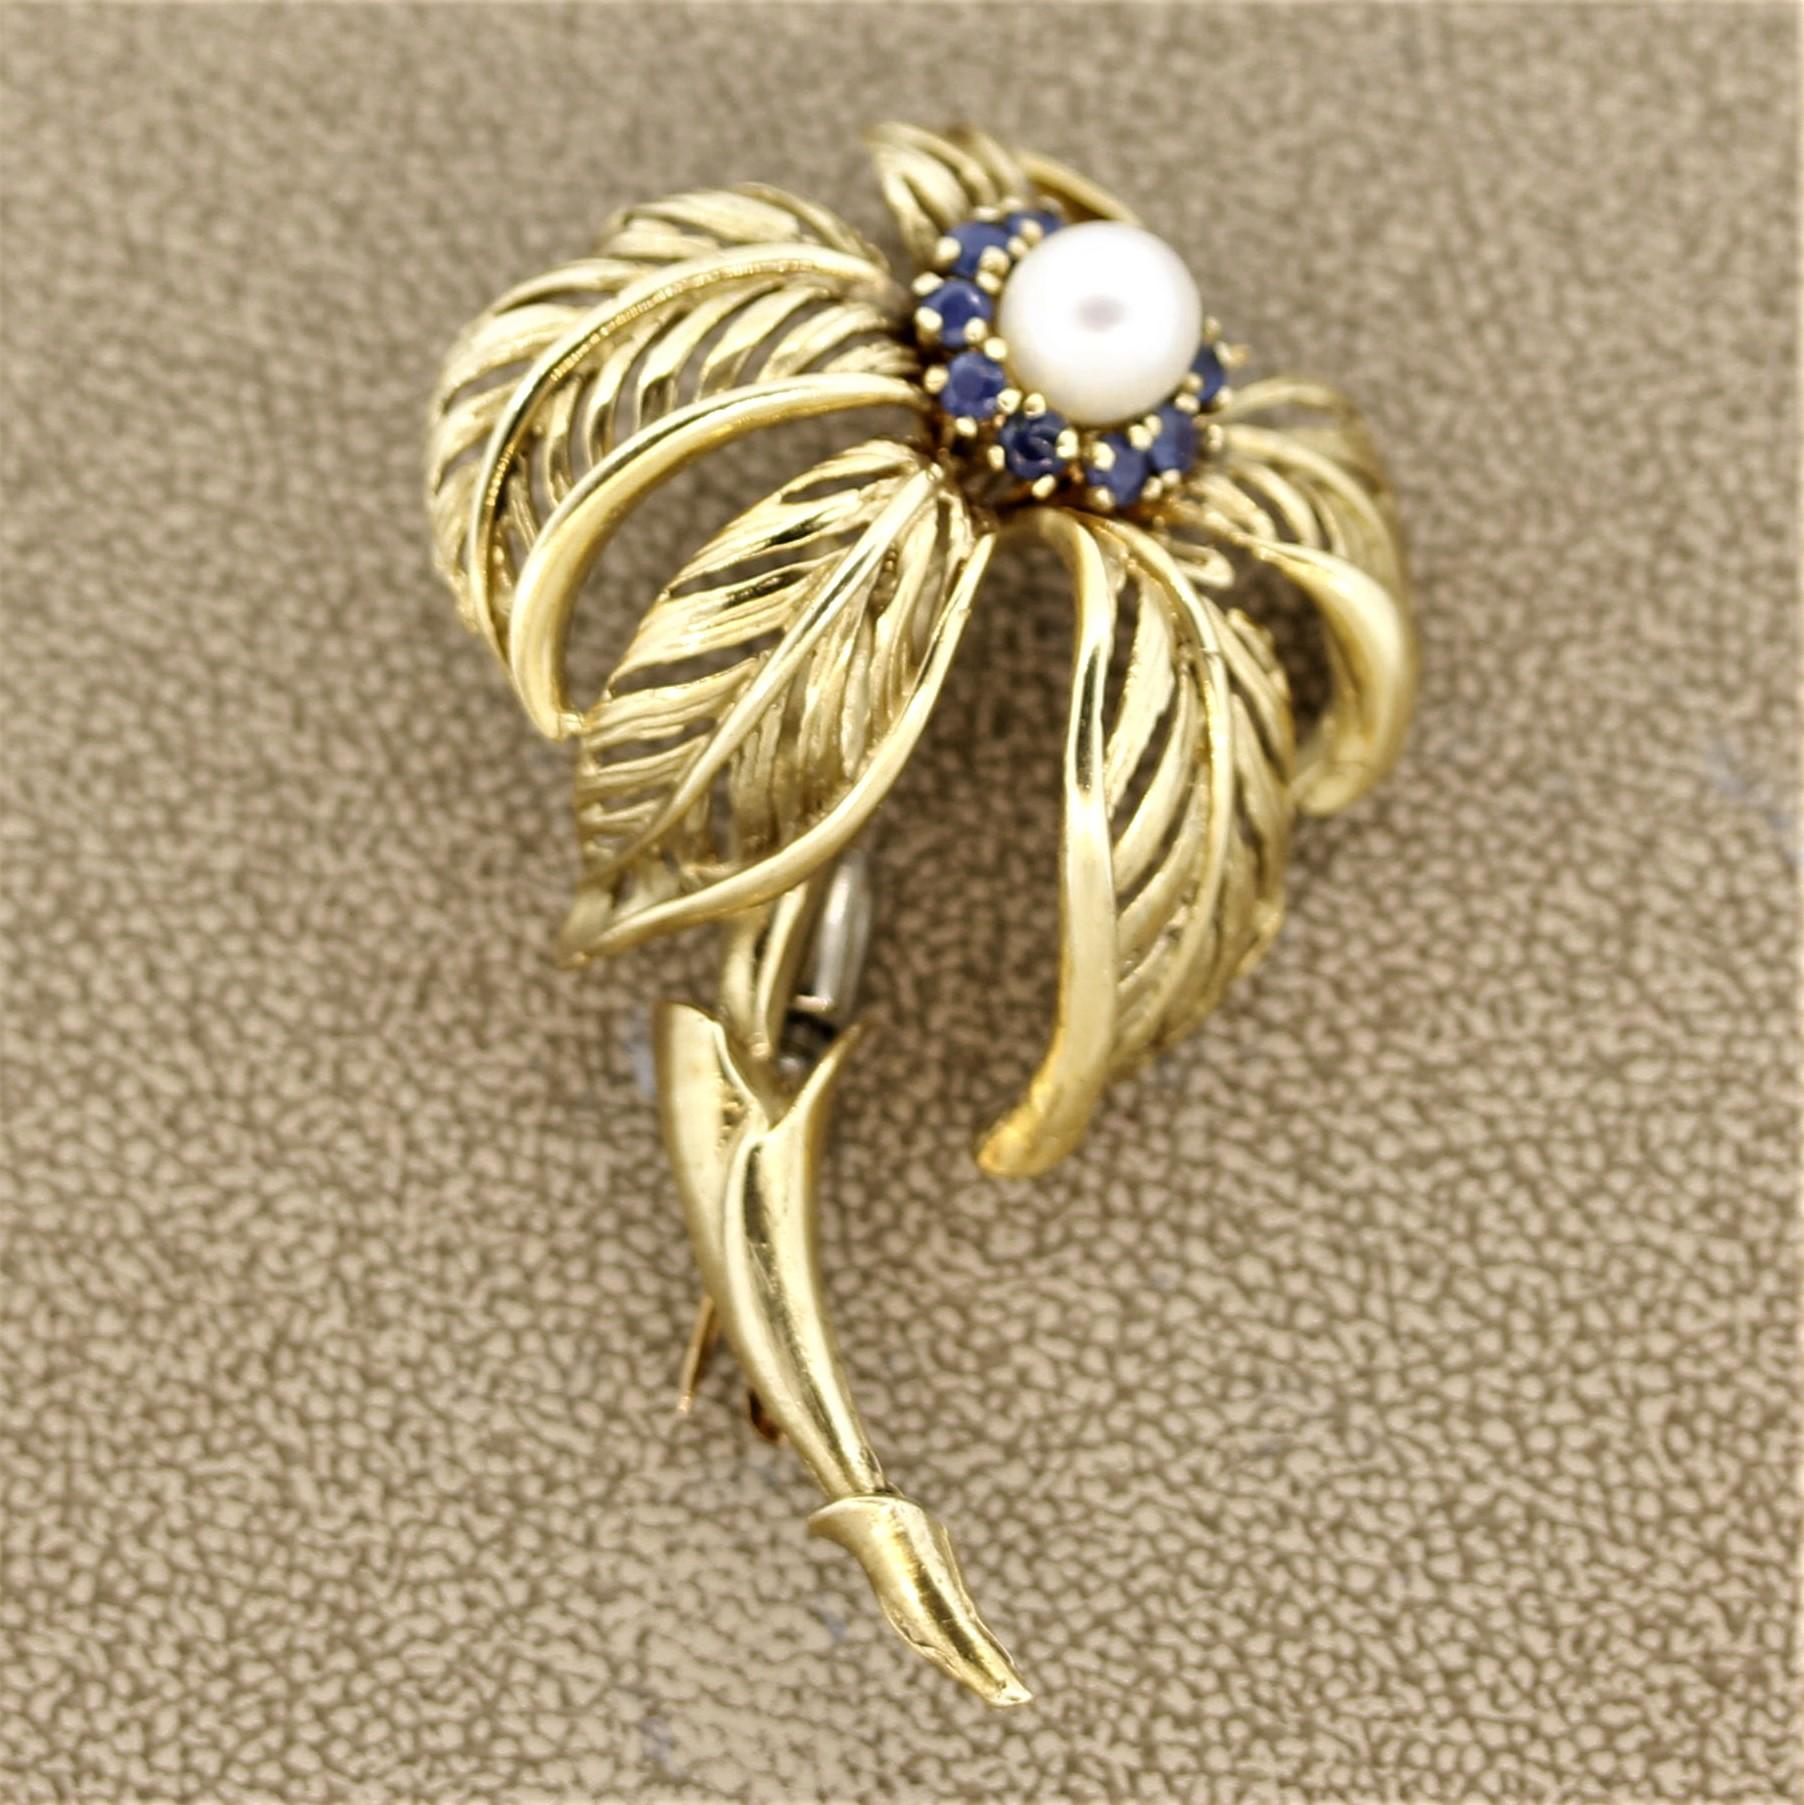 A lovely palm tree blowing in the wind. This brooch features a 7mm round Akoya pearl along with round shaped blue sapphires. The hand-sculpted brooch is made in 14k yellow gold and has excellent detail in the palm's curved leaves and elongated